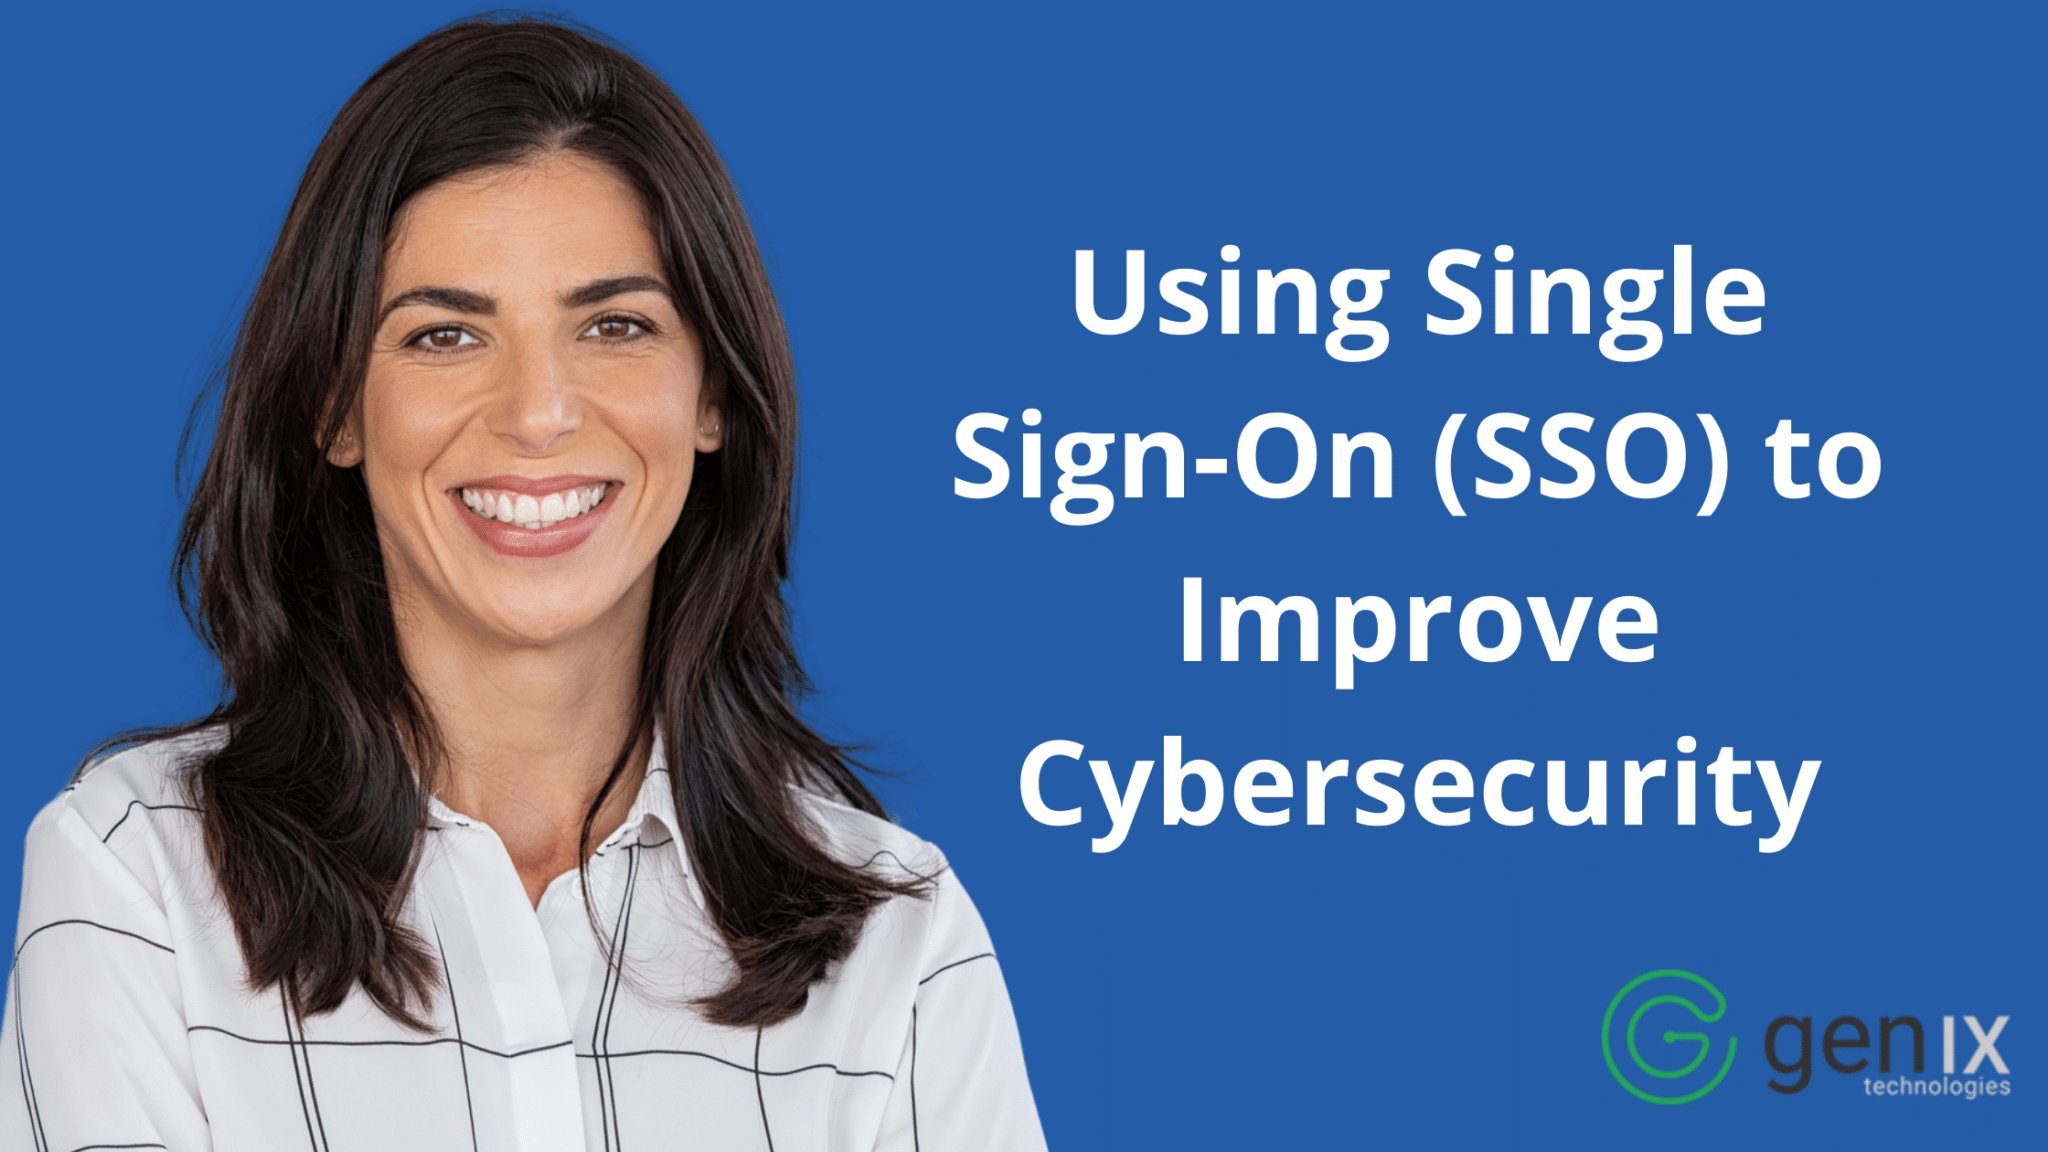 Using Single Sign-On (SSO) to Improve Cybersecurity